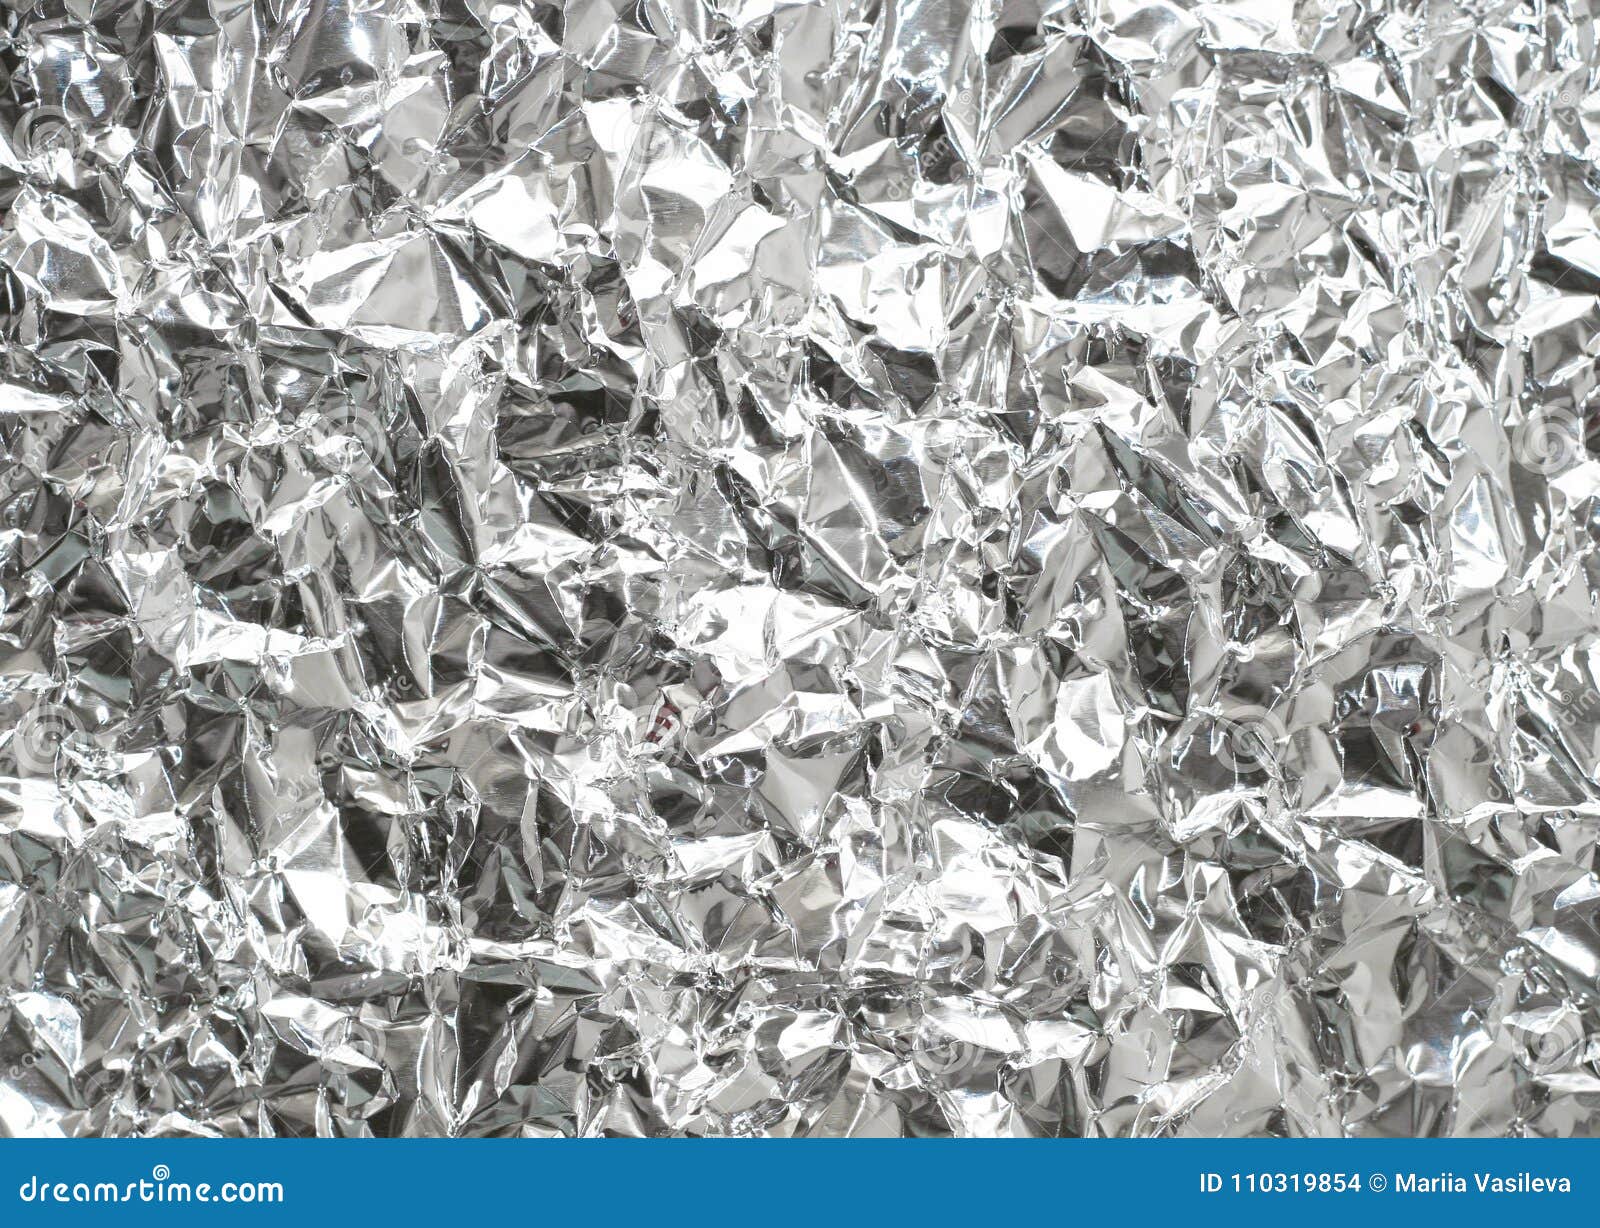 https://thumbs.dreamstime.com/z/background-texture-metal-paper-pattern-abstract-gray-shiny-metallic-foil-aluminum-design-white-steel-surface-reflection-bright-110319854.jpg